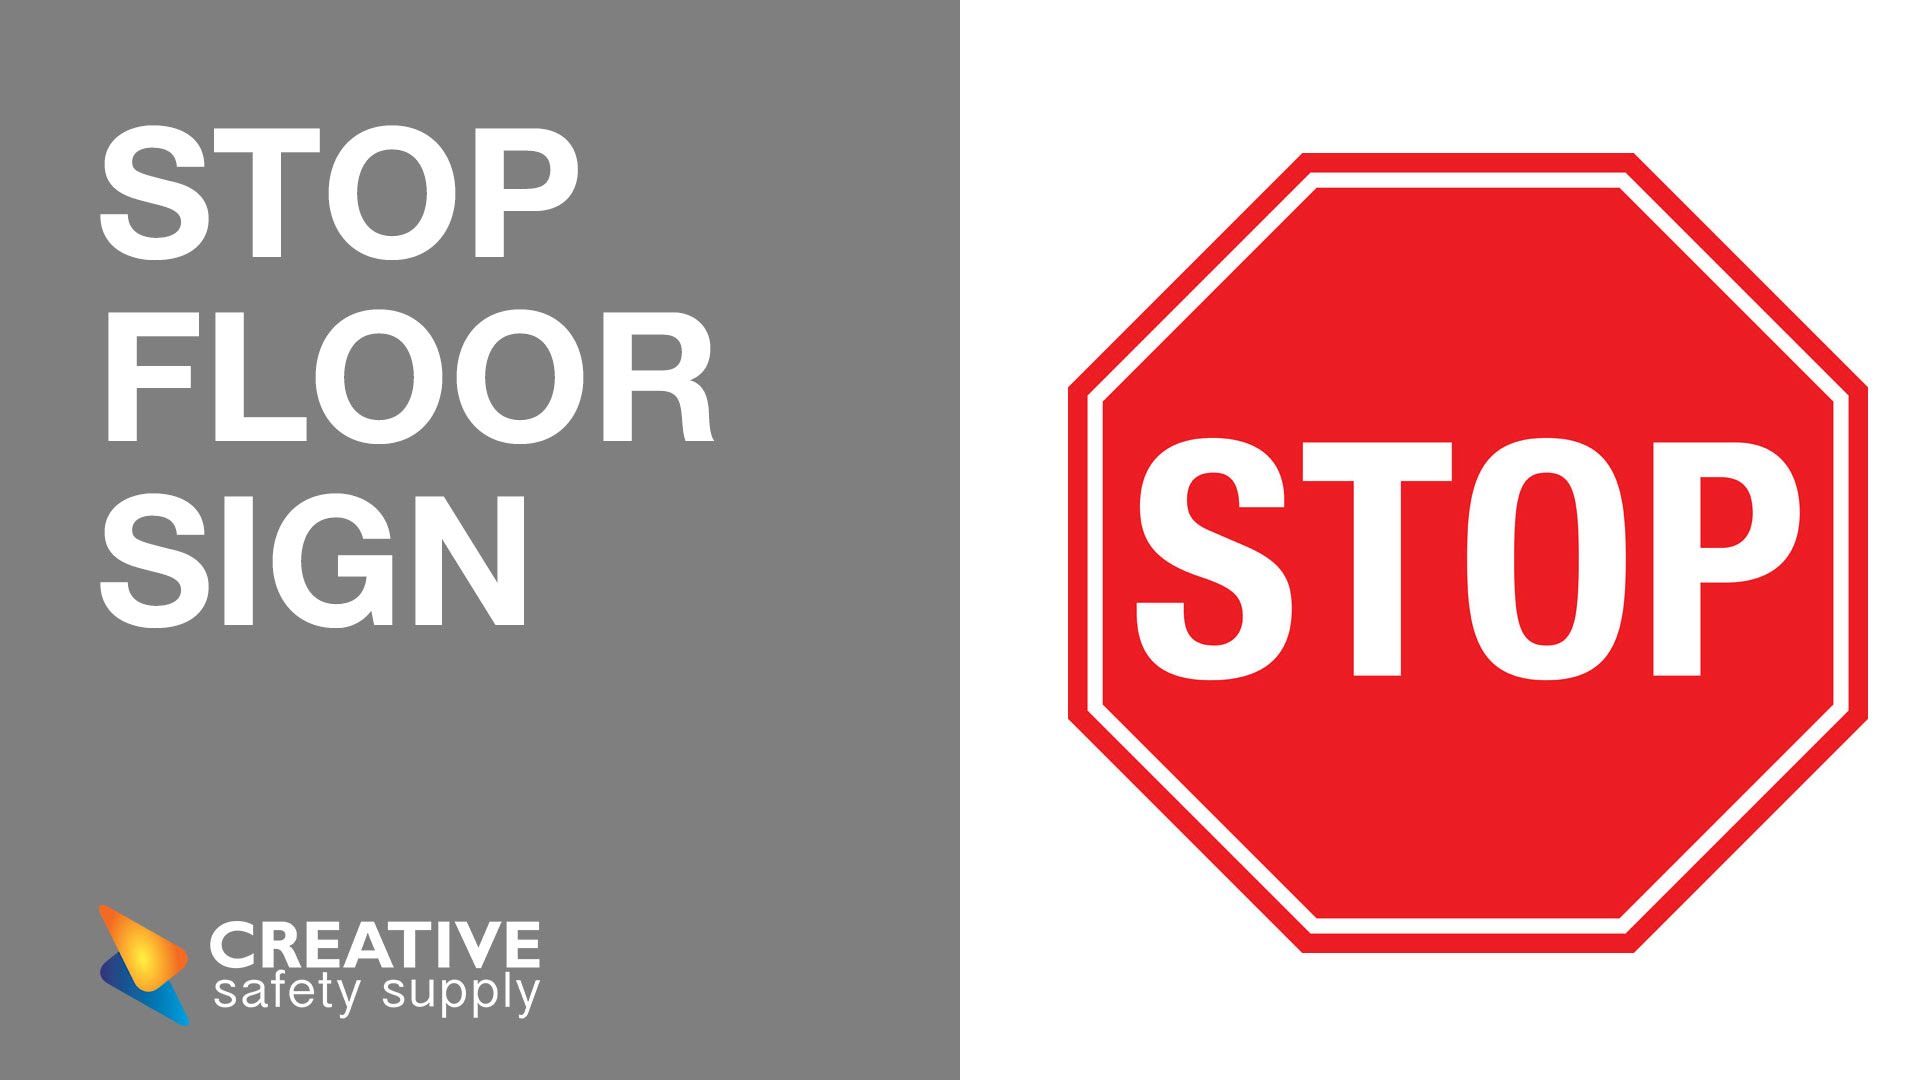 Stop Floor Sign - Simple Instructions Where You Need Them - YouTube